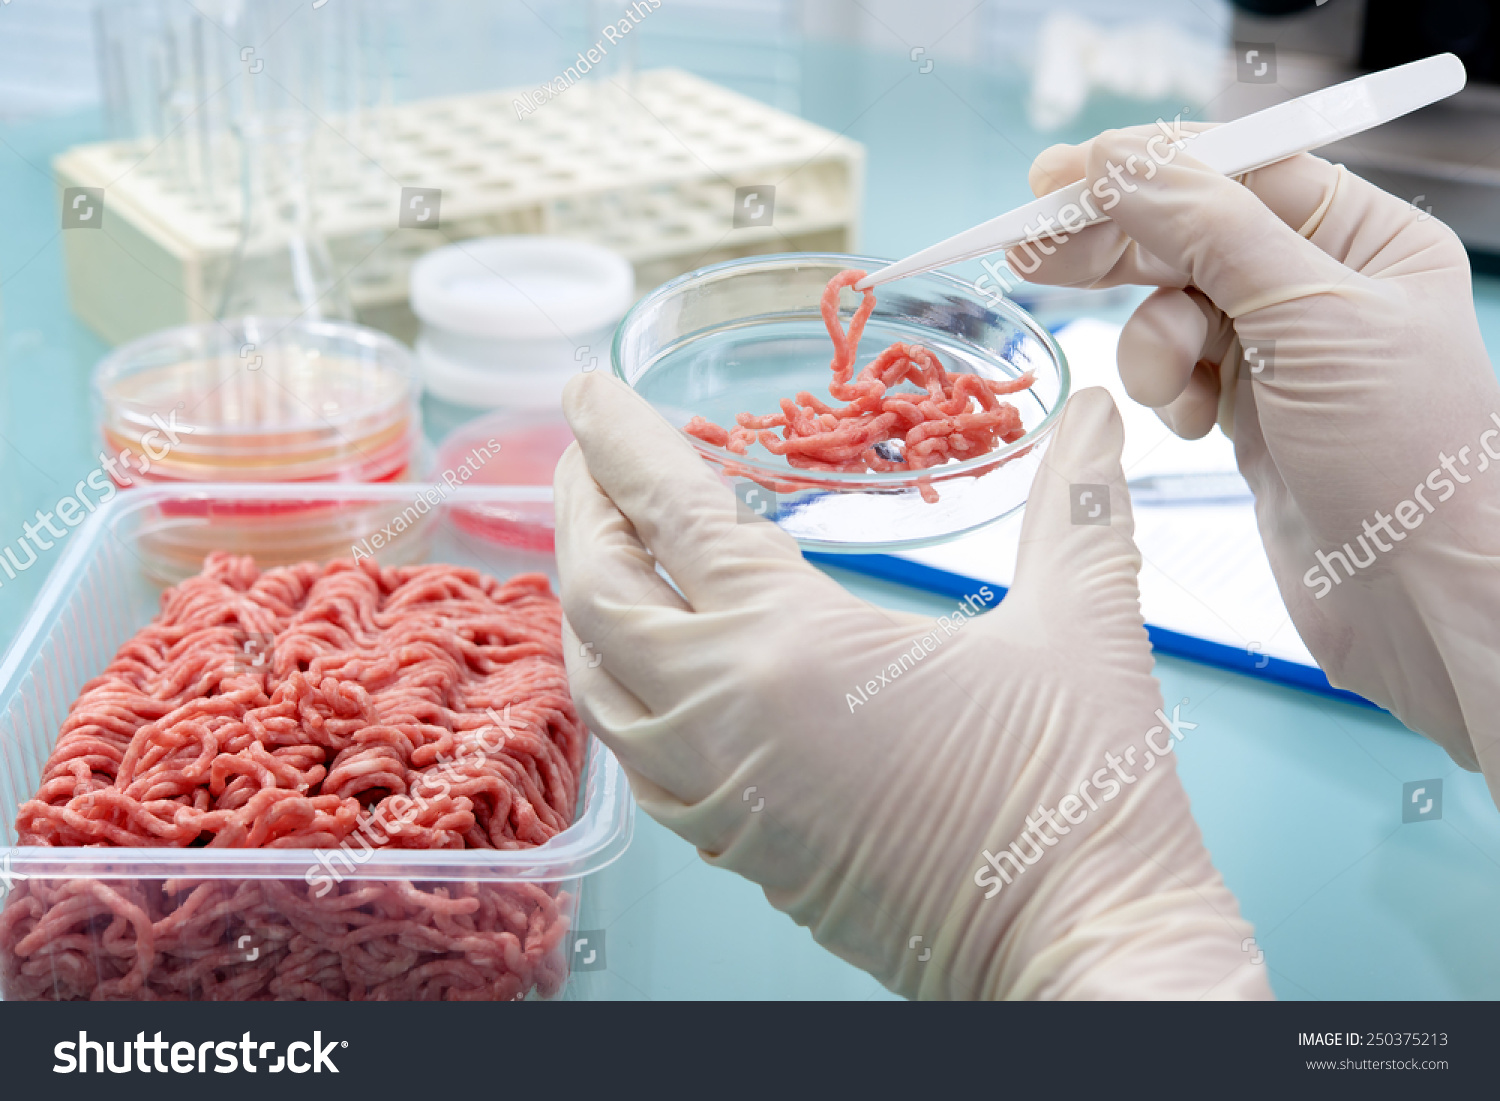 stock-photo-food-quality-control-expert-inspecting-at-meat-specimen-in-the-laboratory-250375213_testing-view